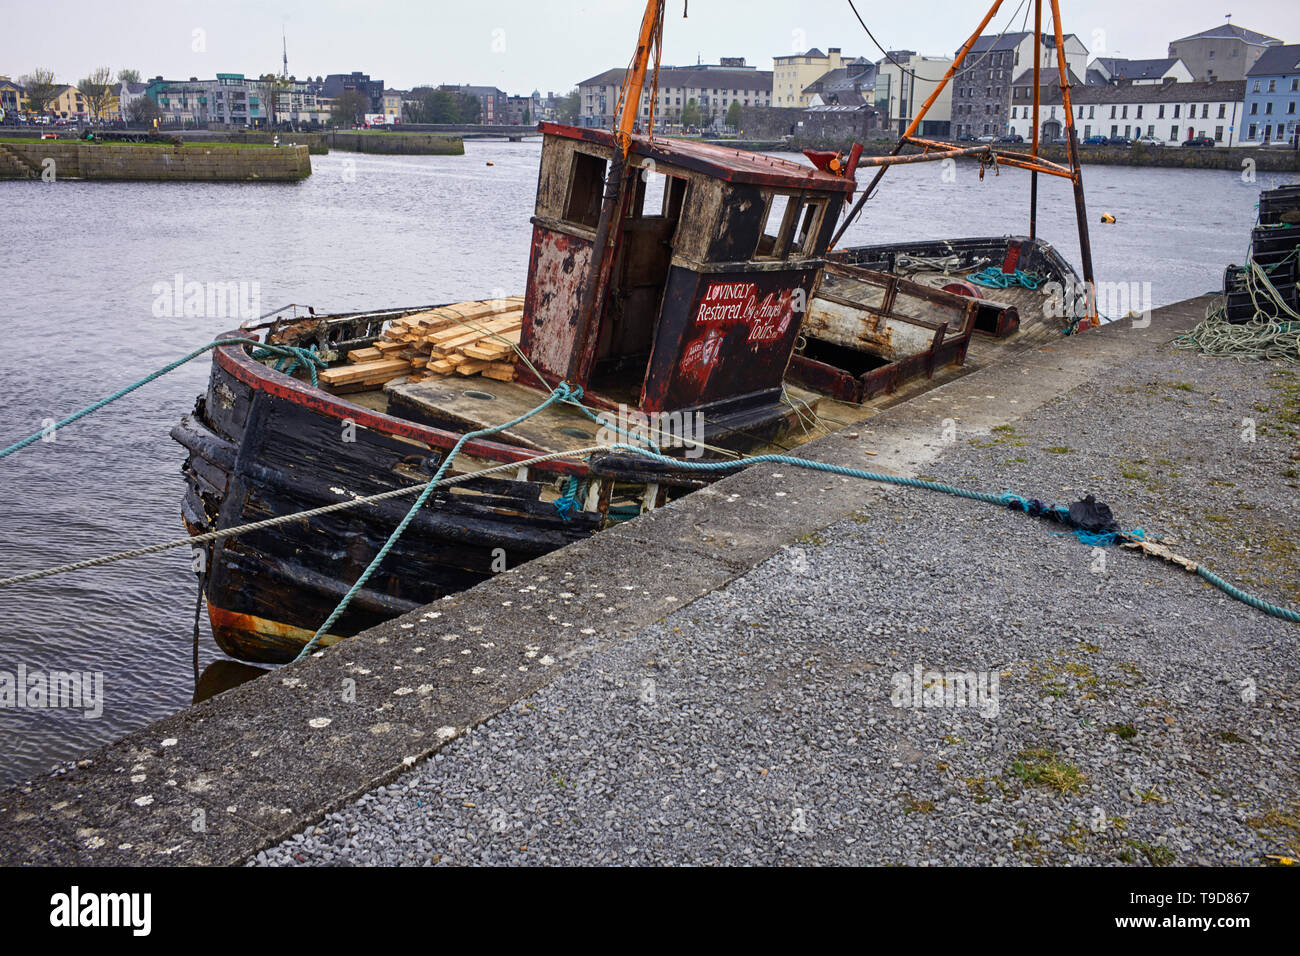 Older style fishing boat undergoing restoration at the Claddaghs in Galway Bay Stock Photo